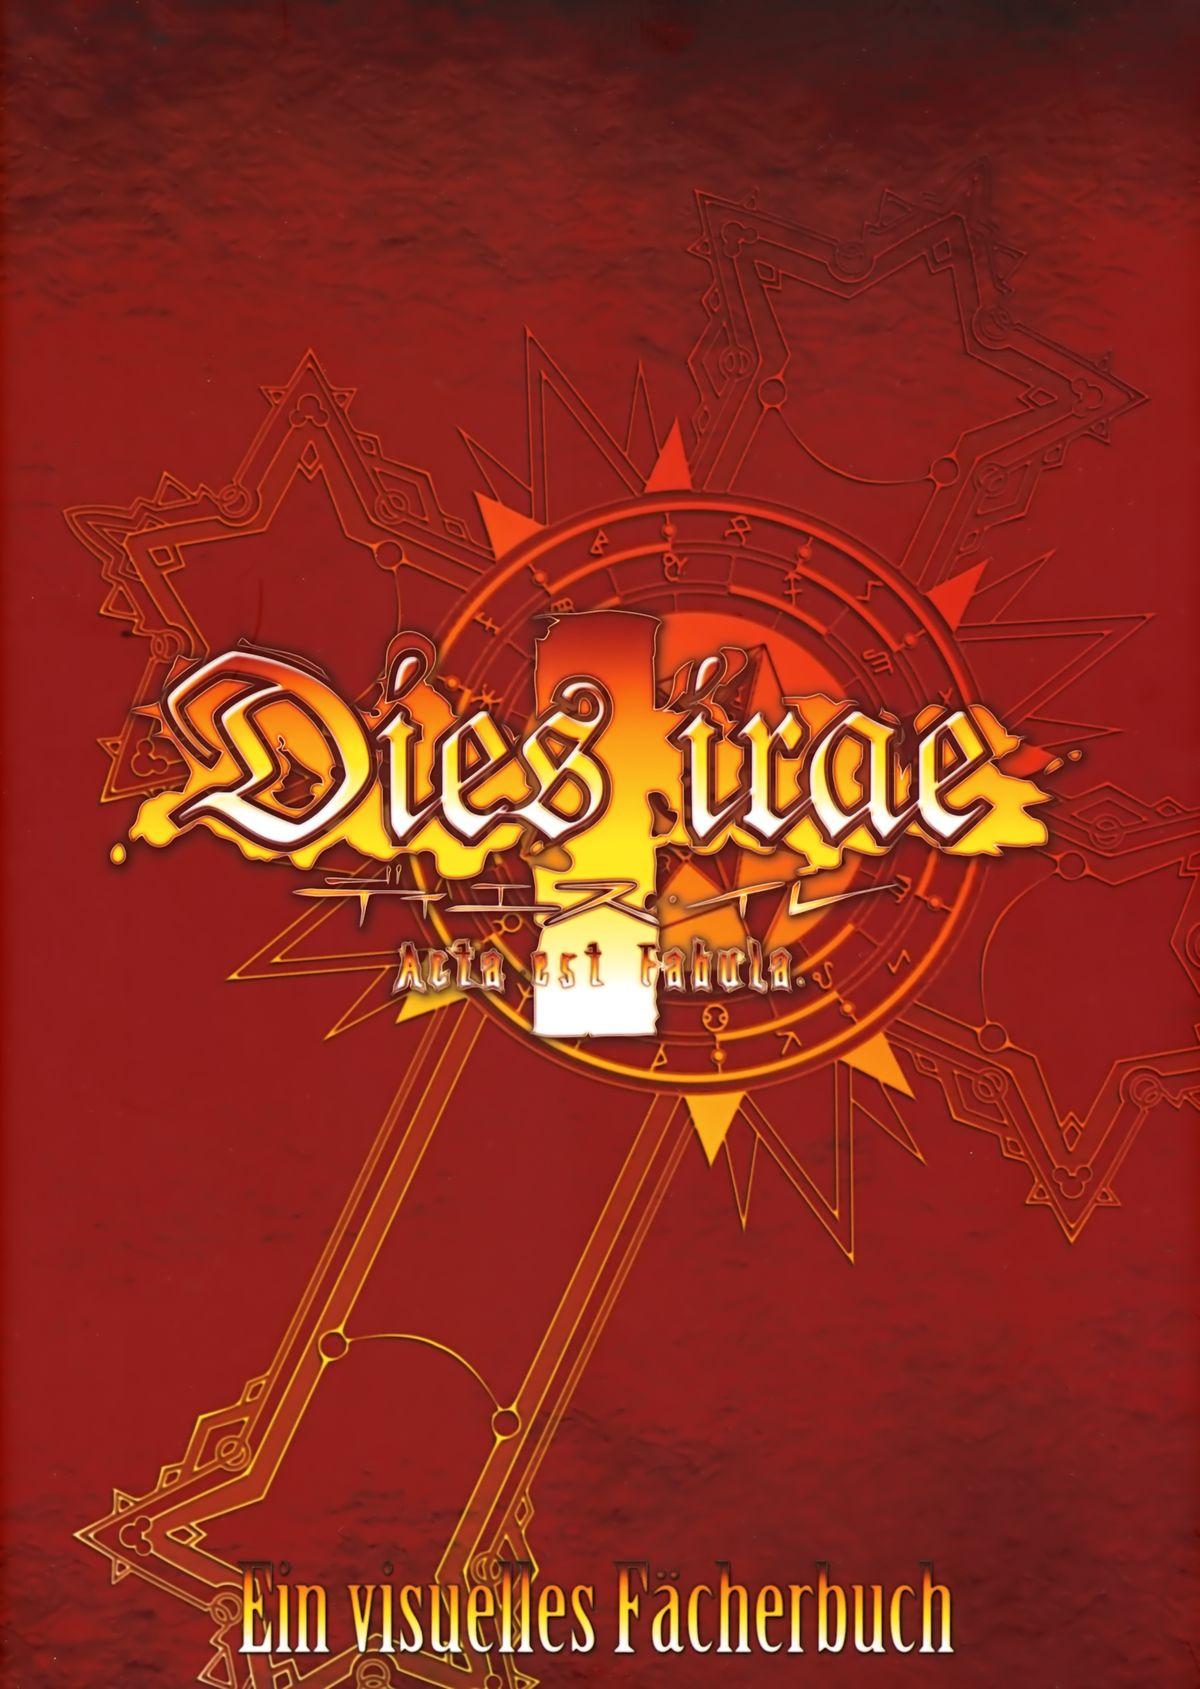 Pica Dies irae Visual Fanbook - Red Book Condom - Page 1